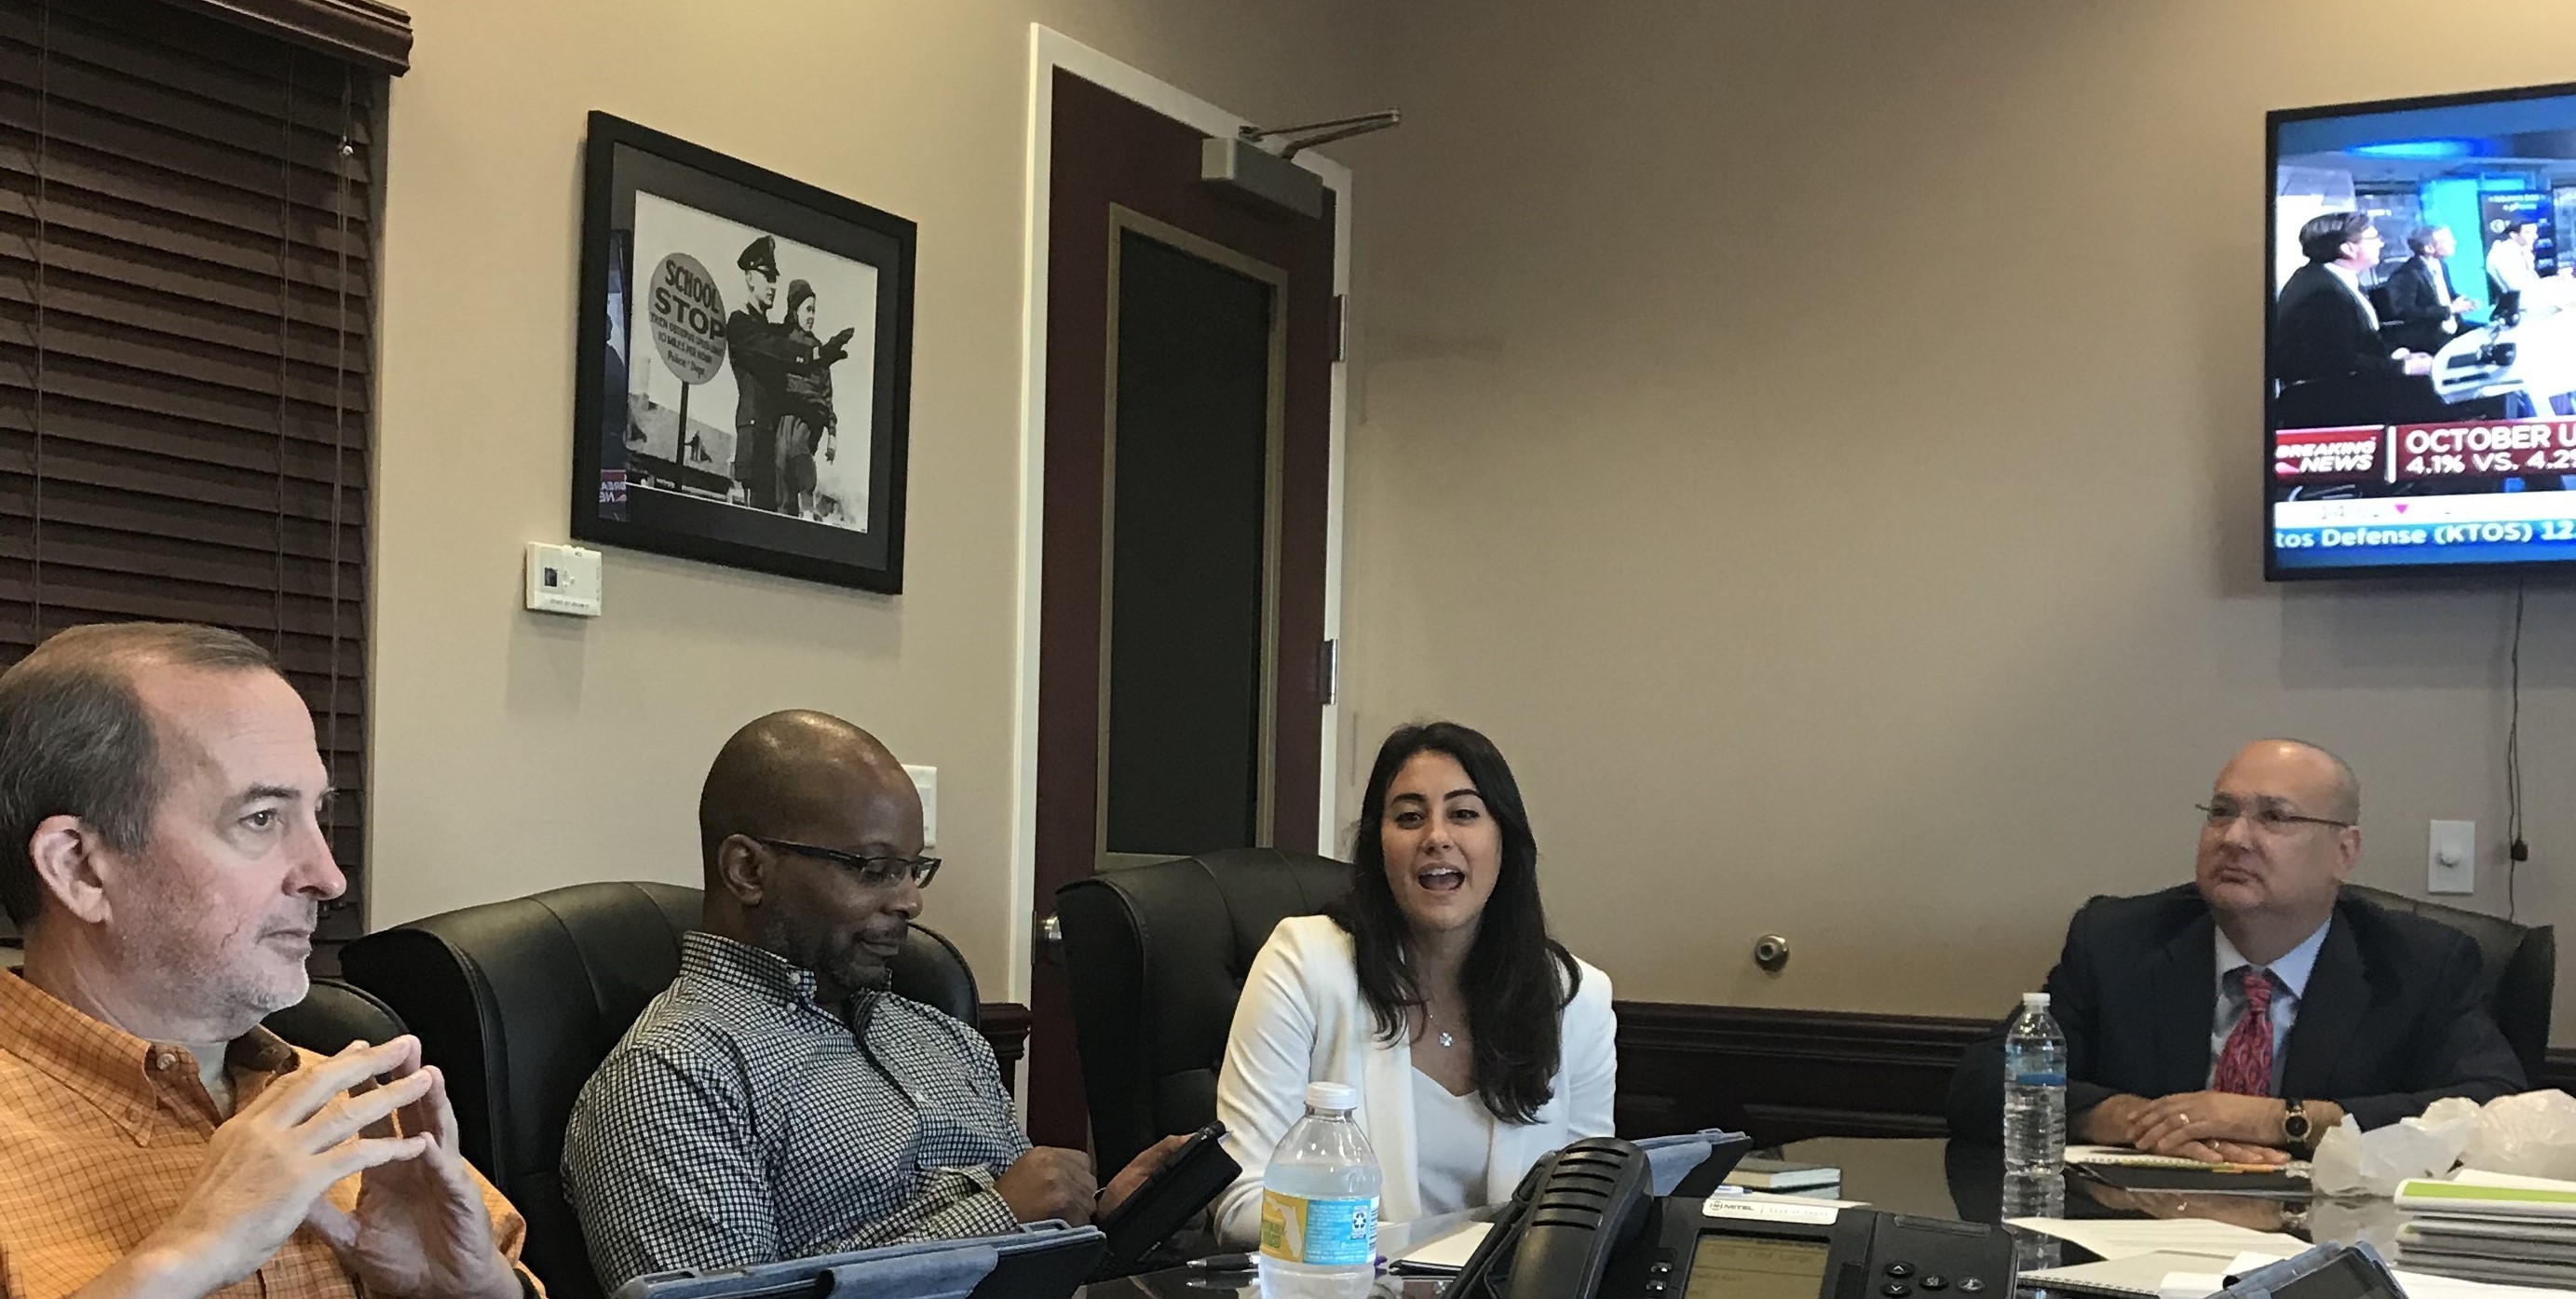 L-R: Trustee Wilton White and Mark Parks, CFO - City of West Palm Beach, listen to Ms. Jaclyn Weinman, Vice President, J.P. Morgan Asset Management - Global Real Assets about the upcoming 3.5 million dollar real estate queue the Board recently entere